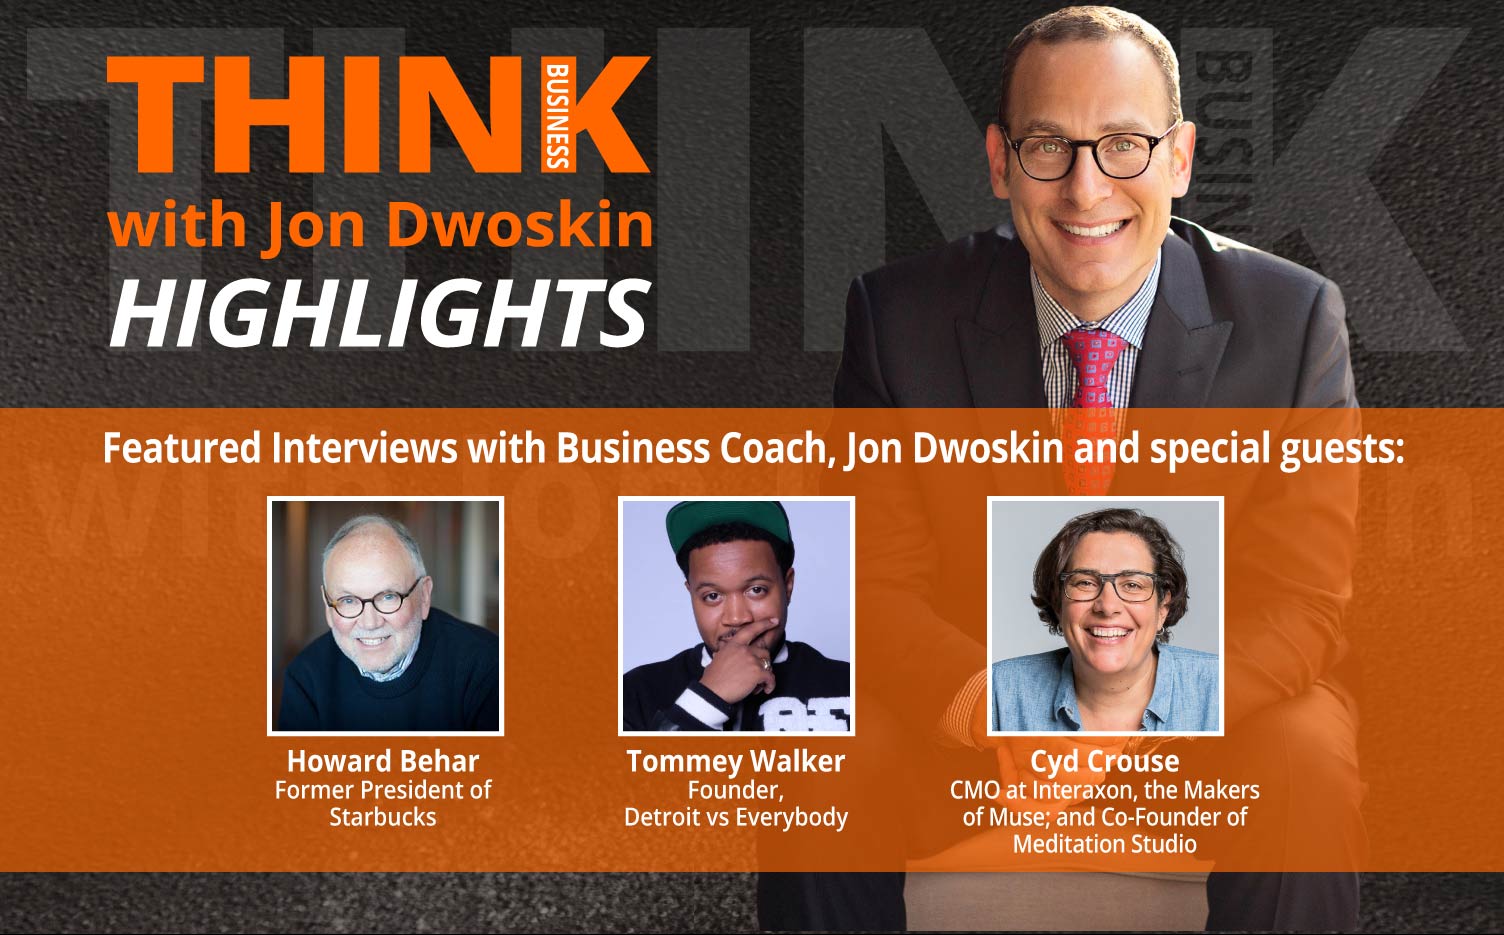 THINK Business: HIGHLIGHTS - Jon Dwoskin Featured Interviews with Howard Behar, Tommey Walker and Cyd Crouse